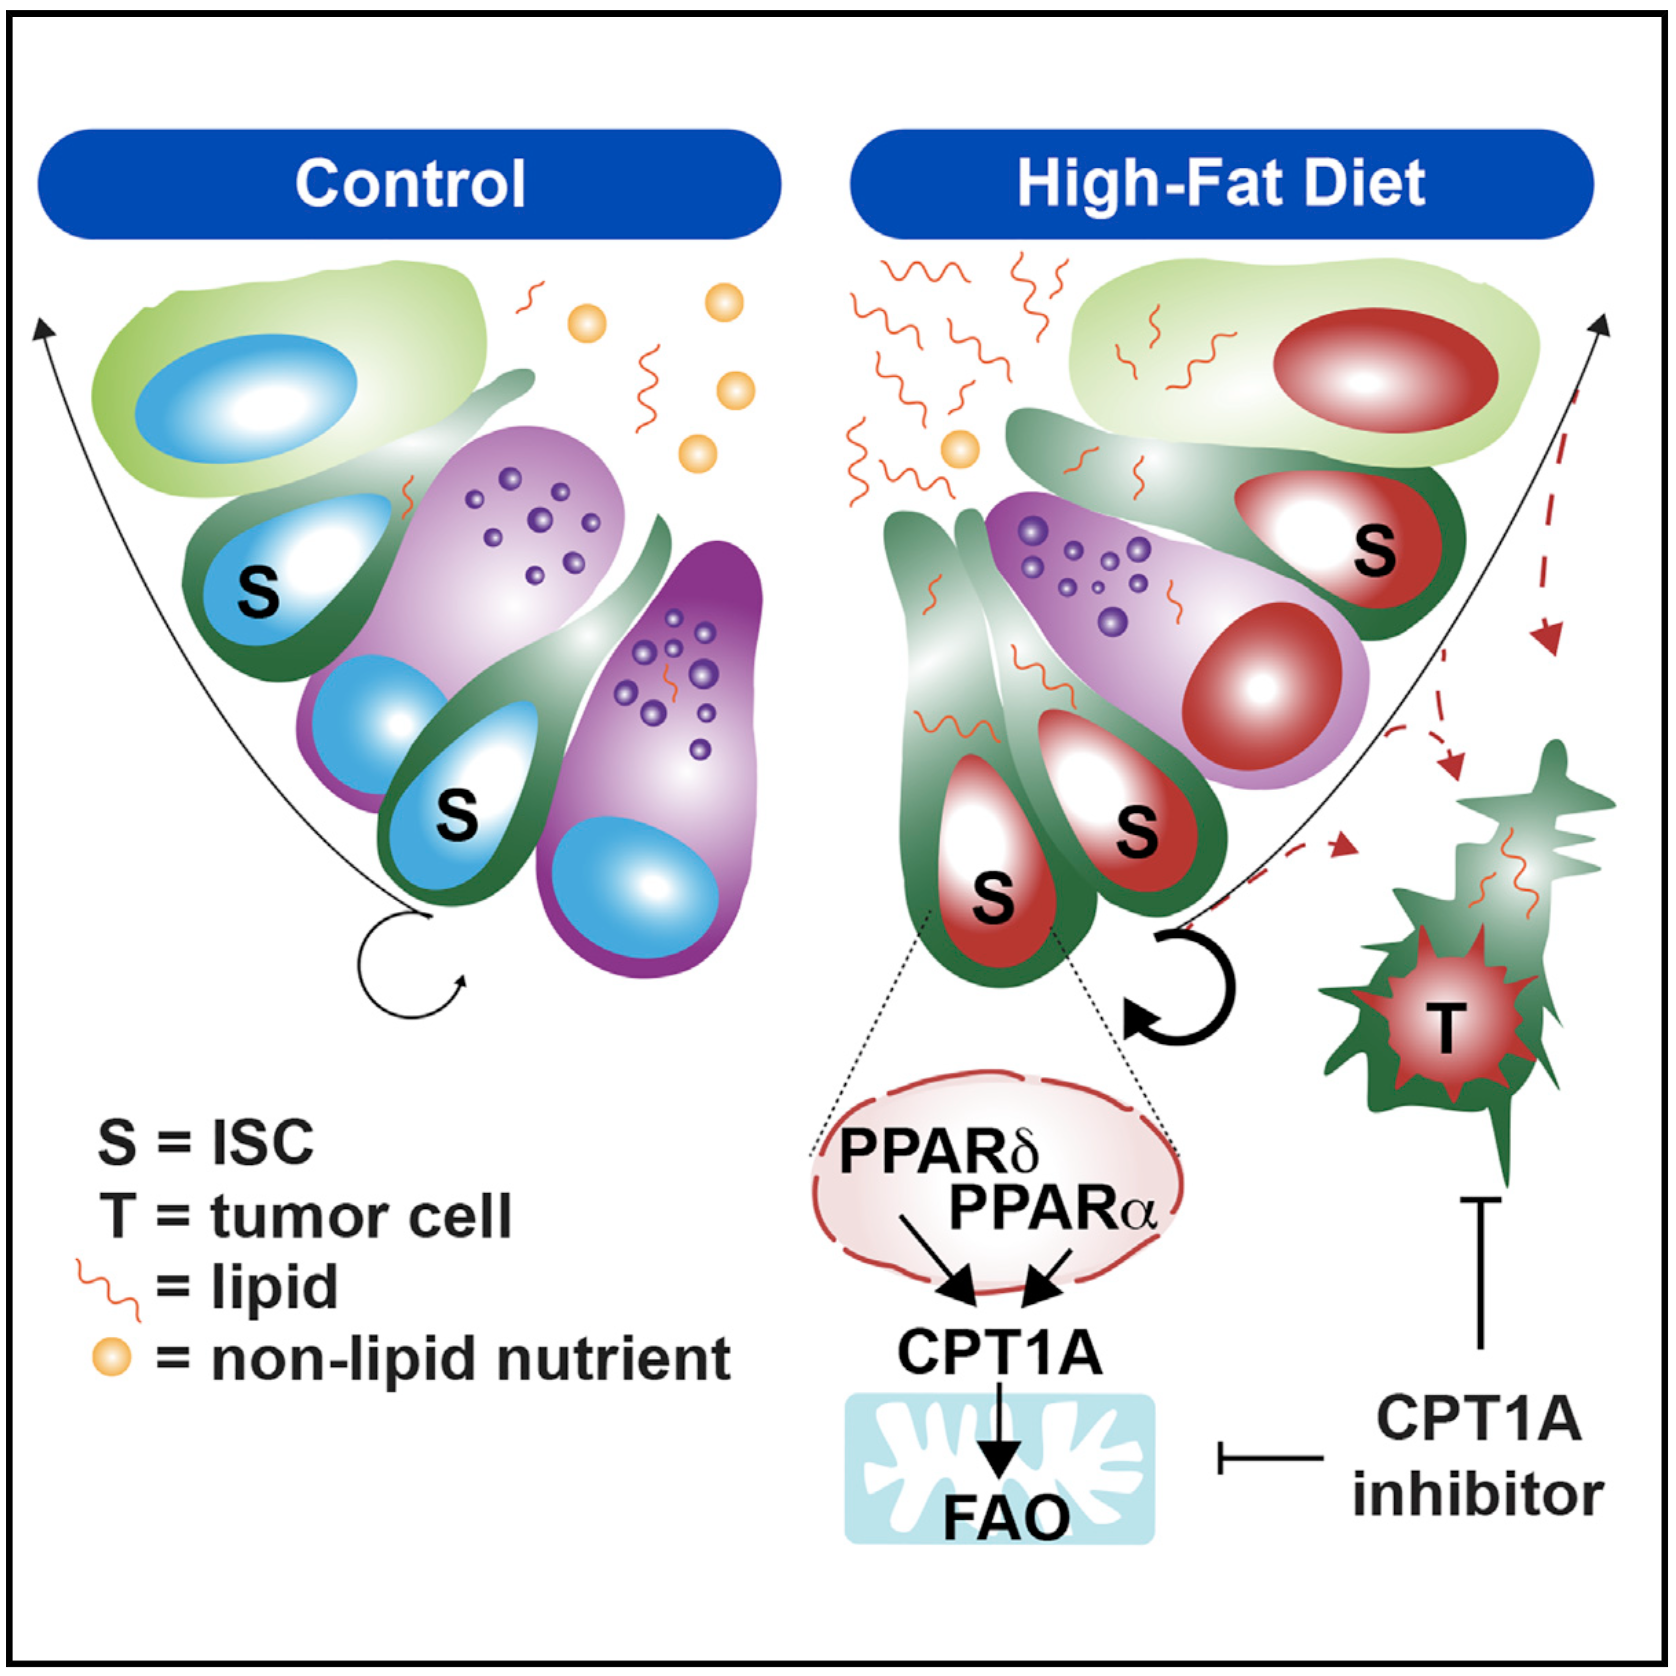 High-fat diet-activated fatty acid oxidation mediates intestinal stemness and tumorigenicity